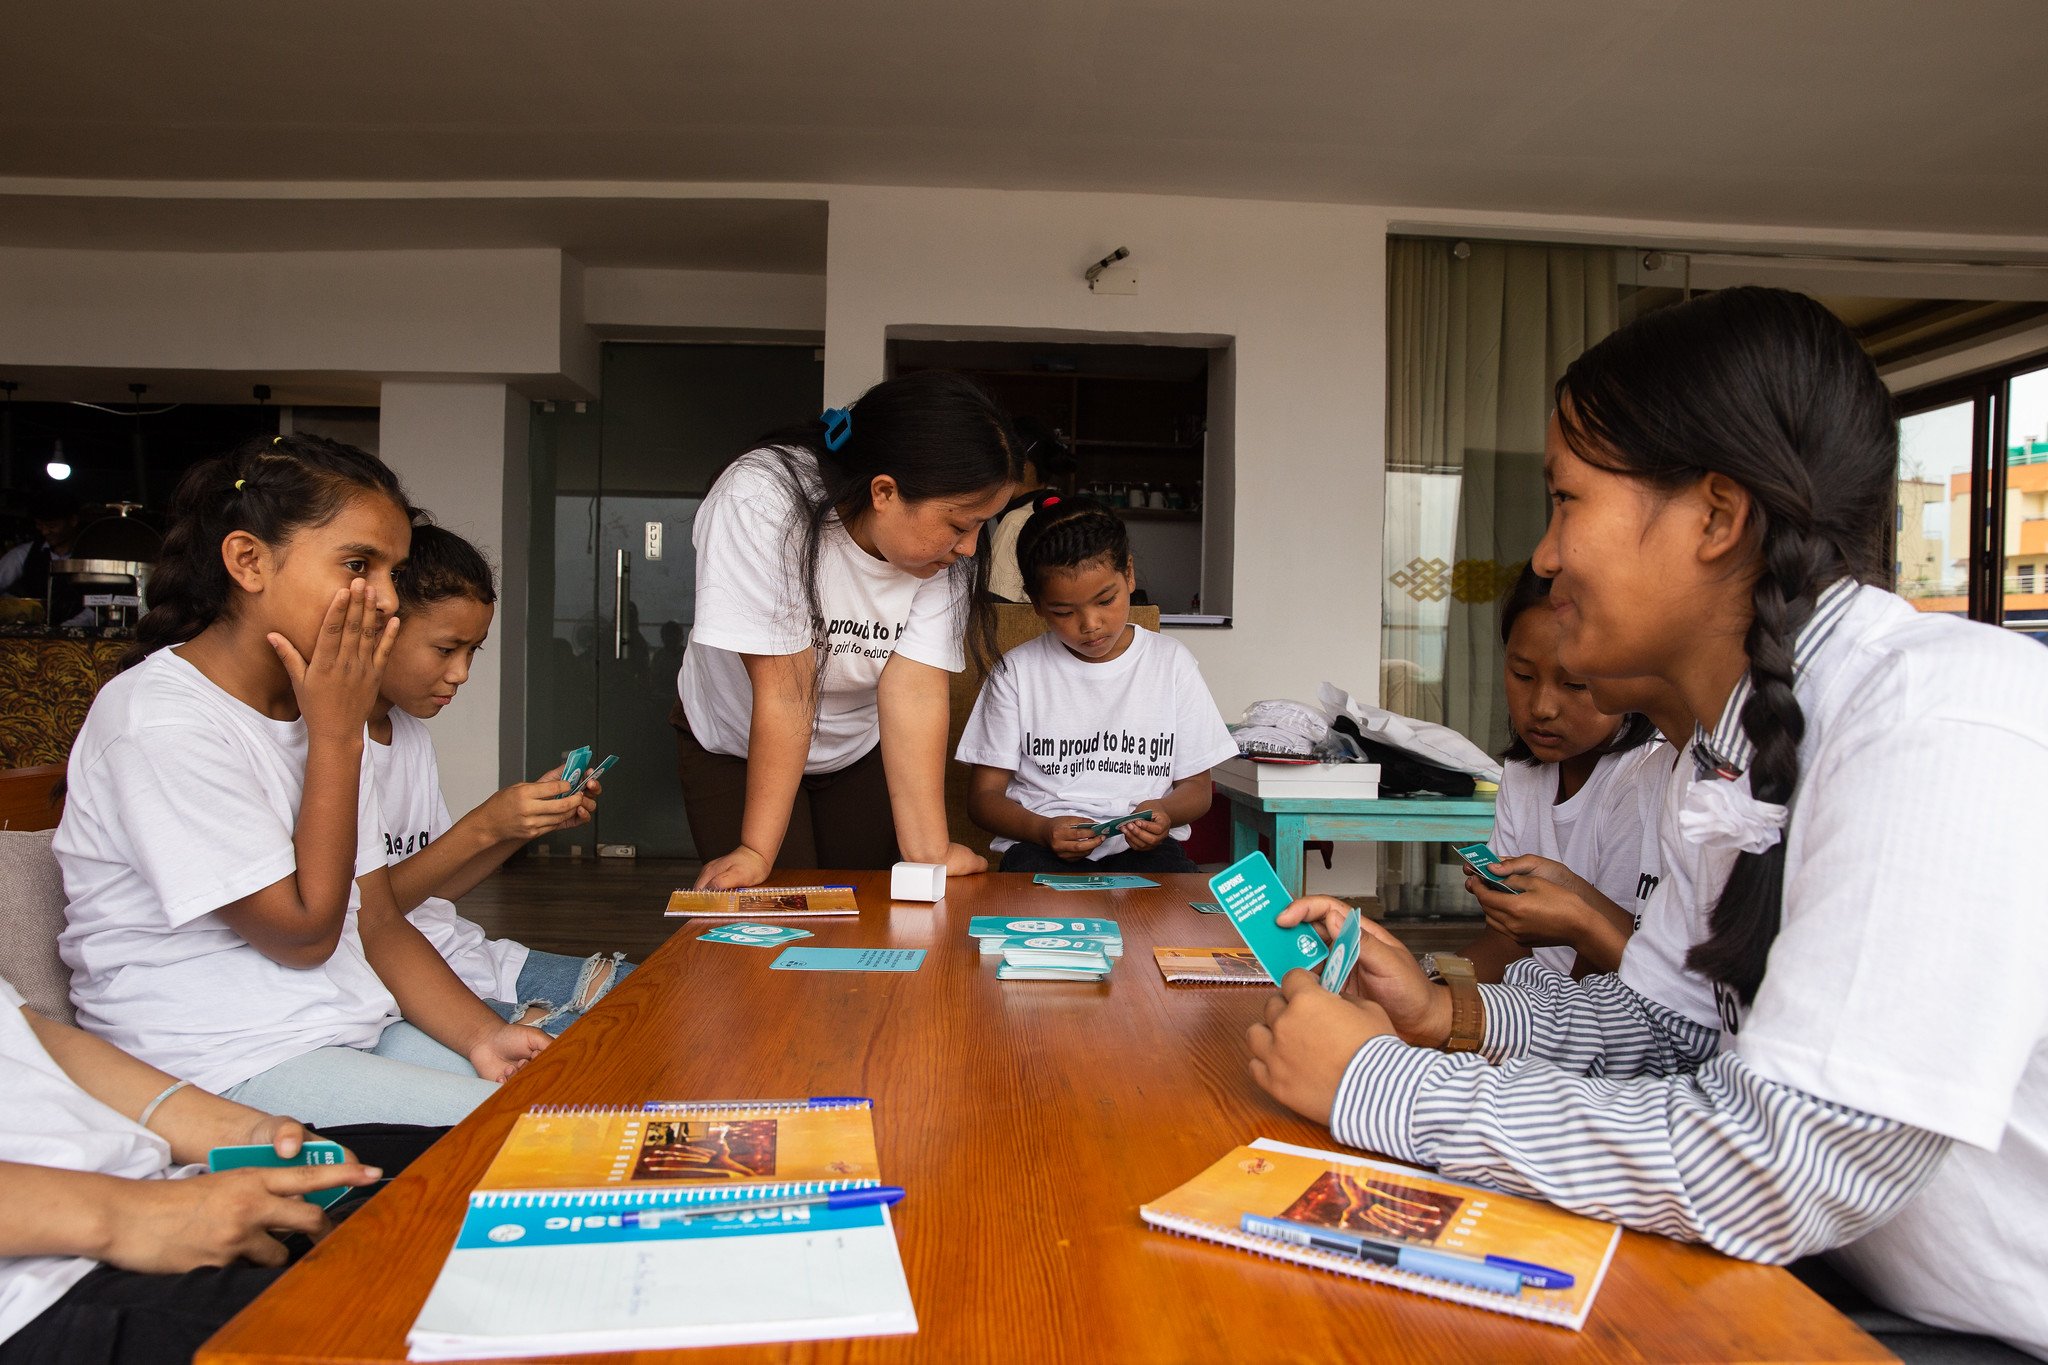  Girls play She’s the First’s What Would You Do? card game to learn about healthy relationships during a mentorship session with The Small World in Kathmandu. (Photo by Uma Bista) 